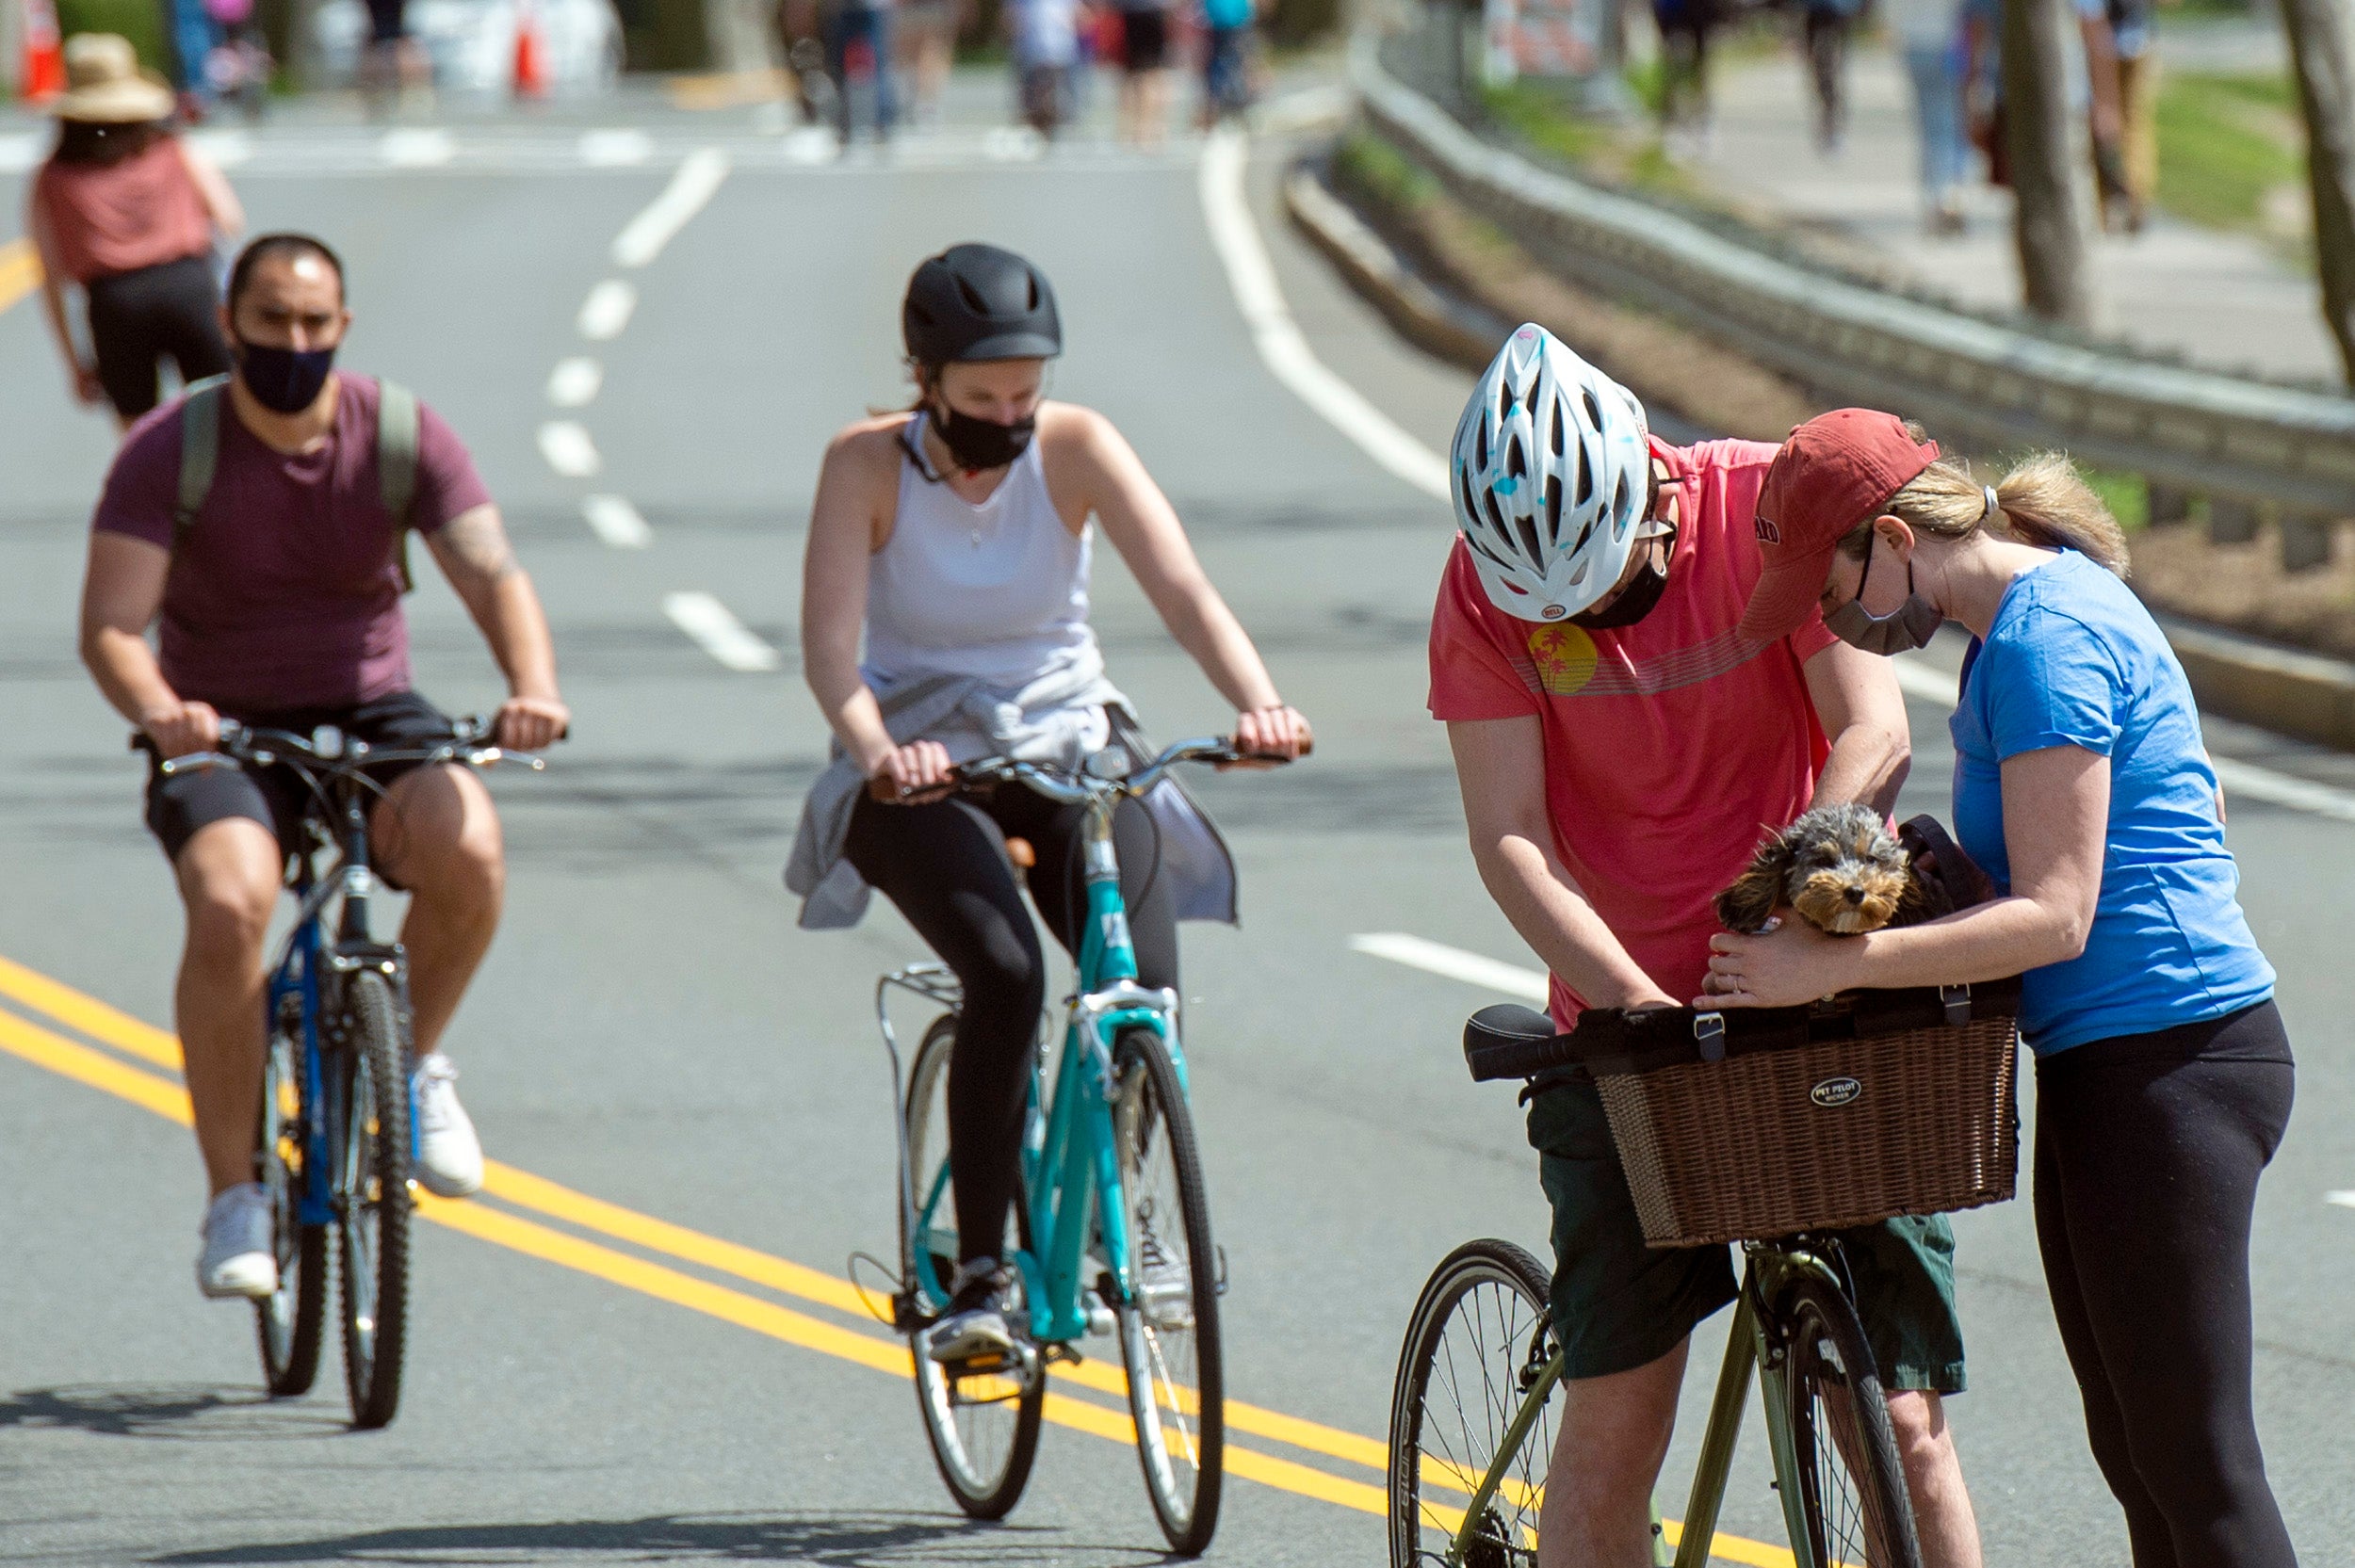 Sam Lazarus, a 2016 graduate of Harvard Business School, right, and Molly Levitt, 2010 from the Harvard Graduate School of Education, try to get their cockapoo comfortable in its new bicycle basket.